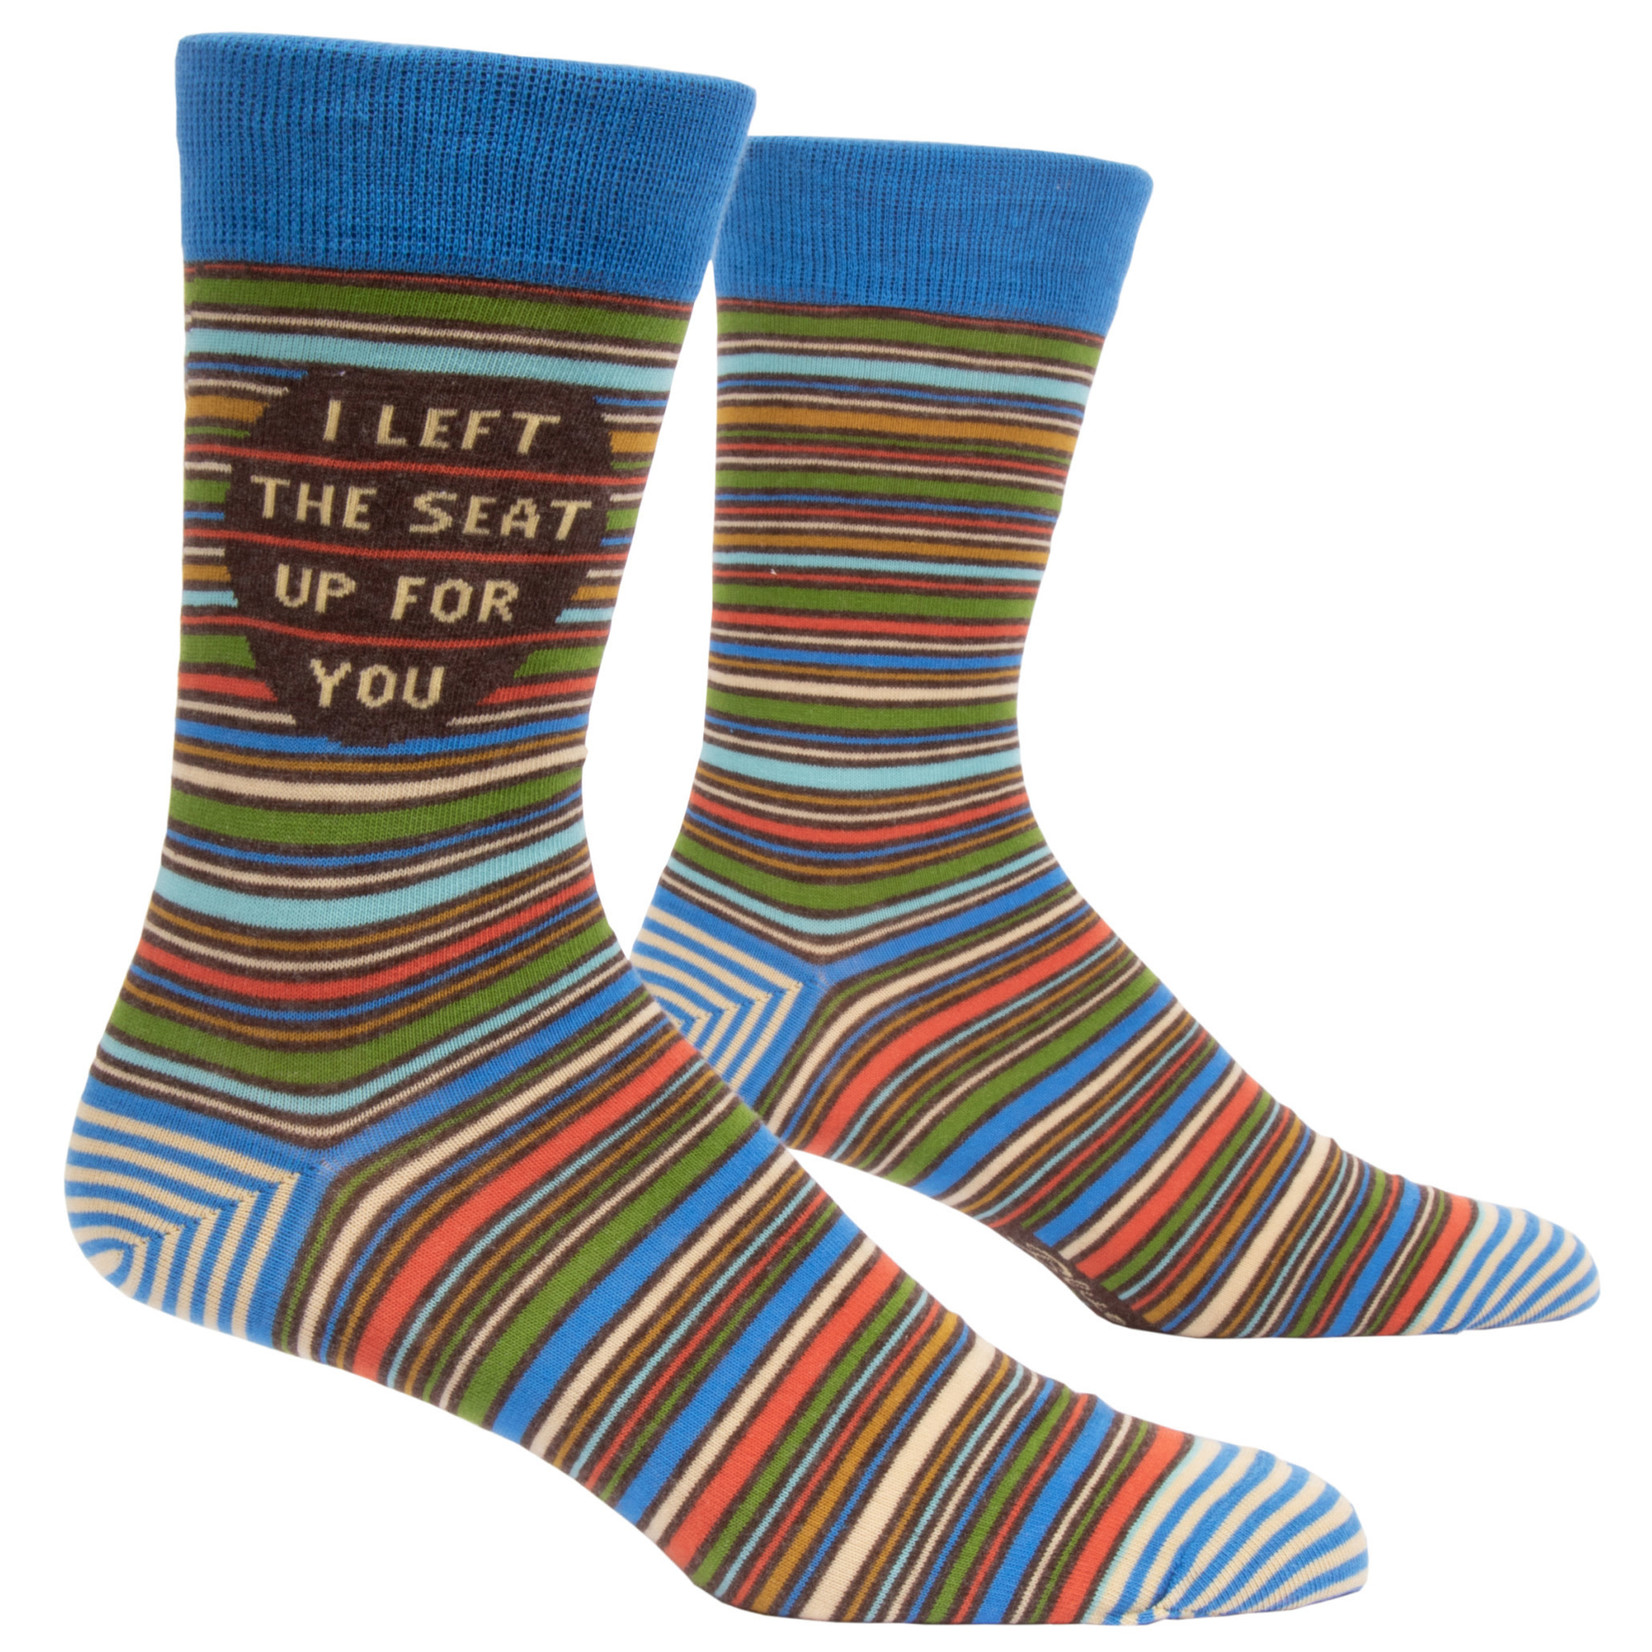 Socks (Mens) - I Left The Seat Up For You